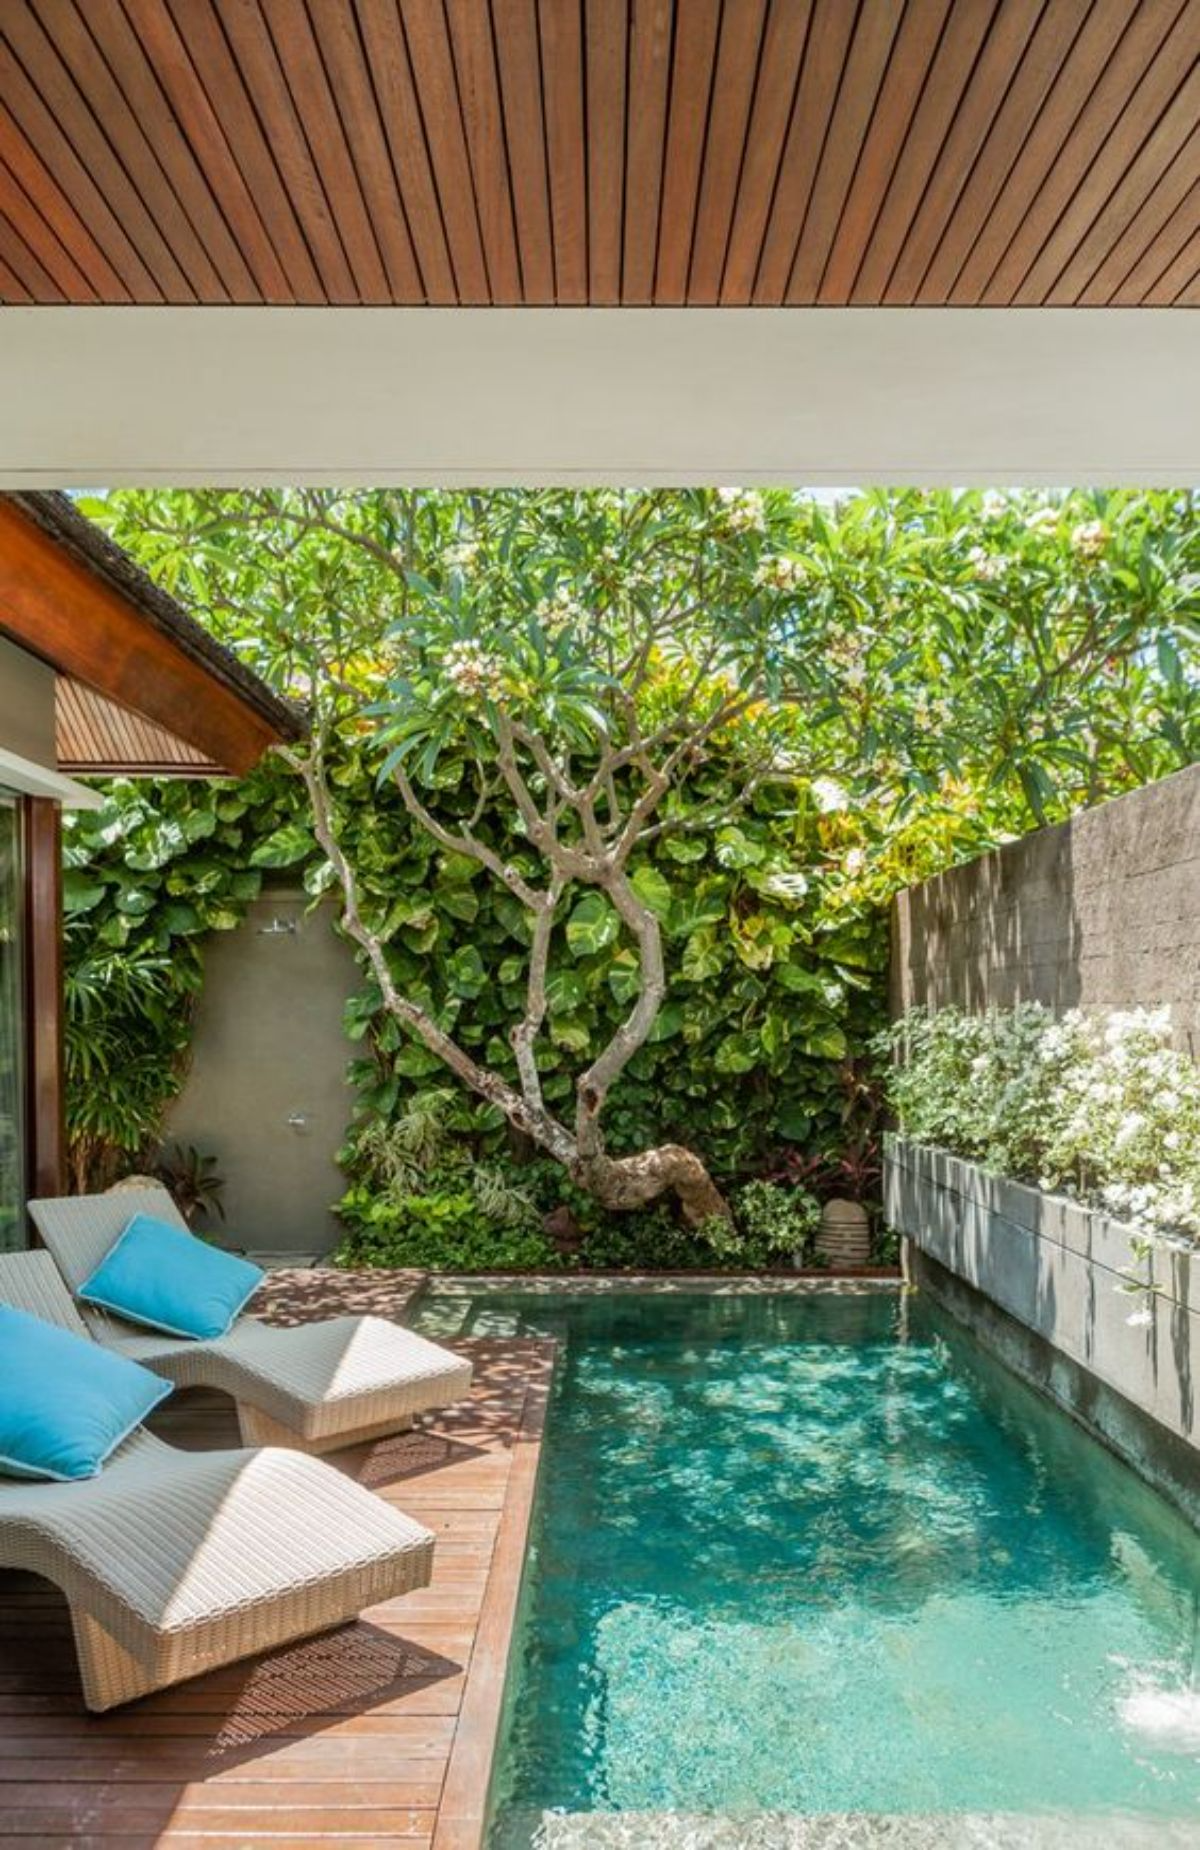 Creative Backyard Oasis: Small Pool Ideas for Your Outdoor Retreat